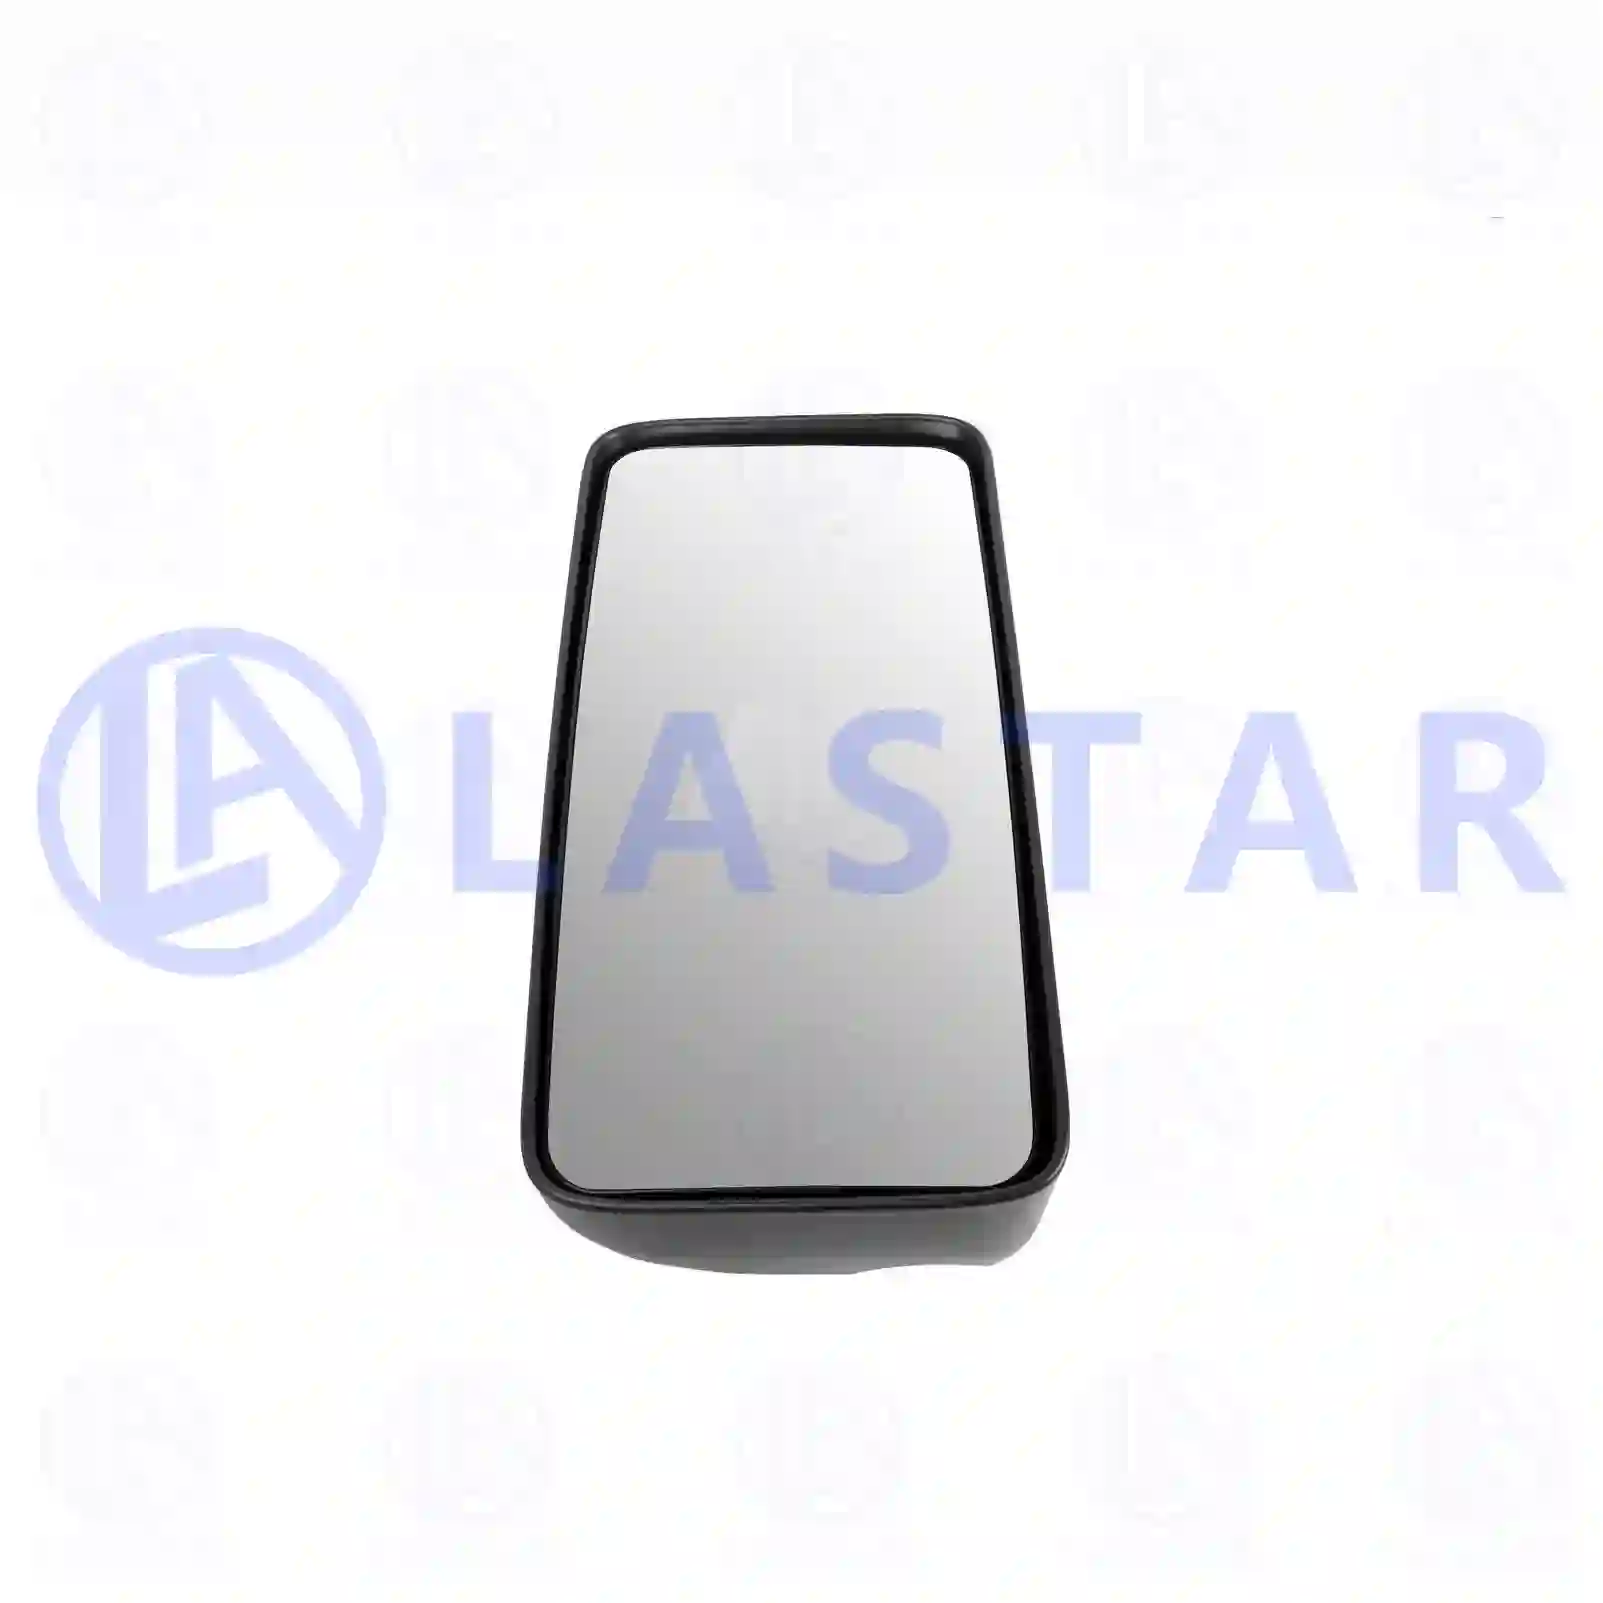 Main mirror, heated, electrical, 77720145, 02997158, 08143122, 98472983 ||  77720145 Lastar Spare Part | Truck Spare Parts, Auotomotive Spare Parts Main mirror, heated, electrical, 77720145, 02997158, 08143122, 98472983 ||  77720145 Lastar Spare Part | Truck Spare Parts, Auotomotive Spare Parts